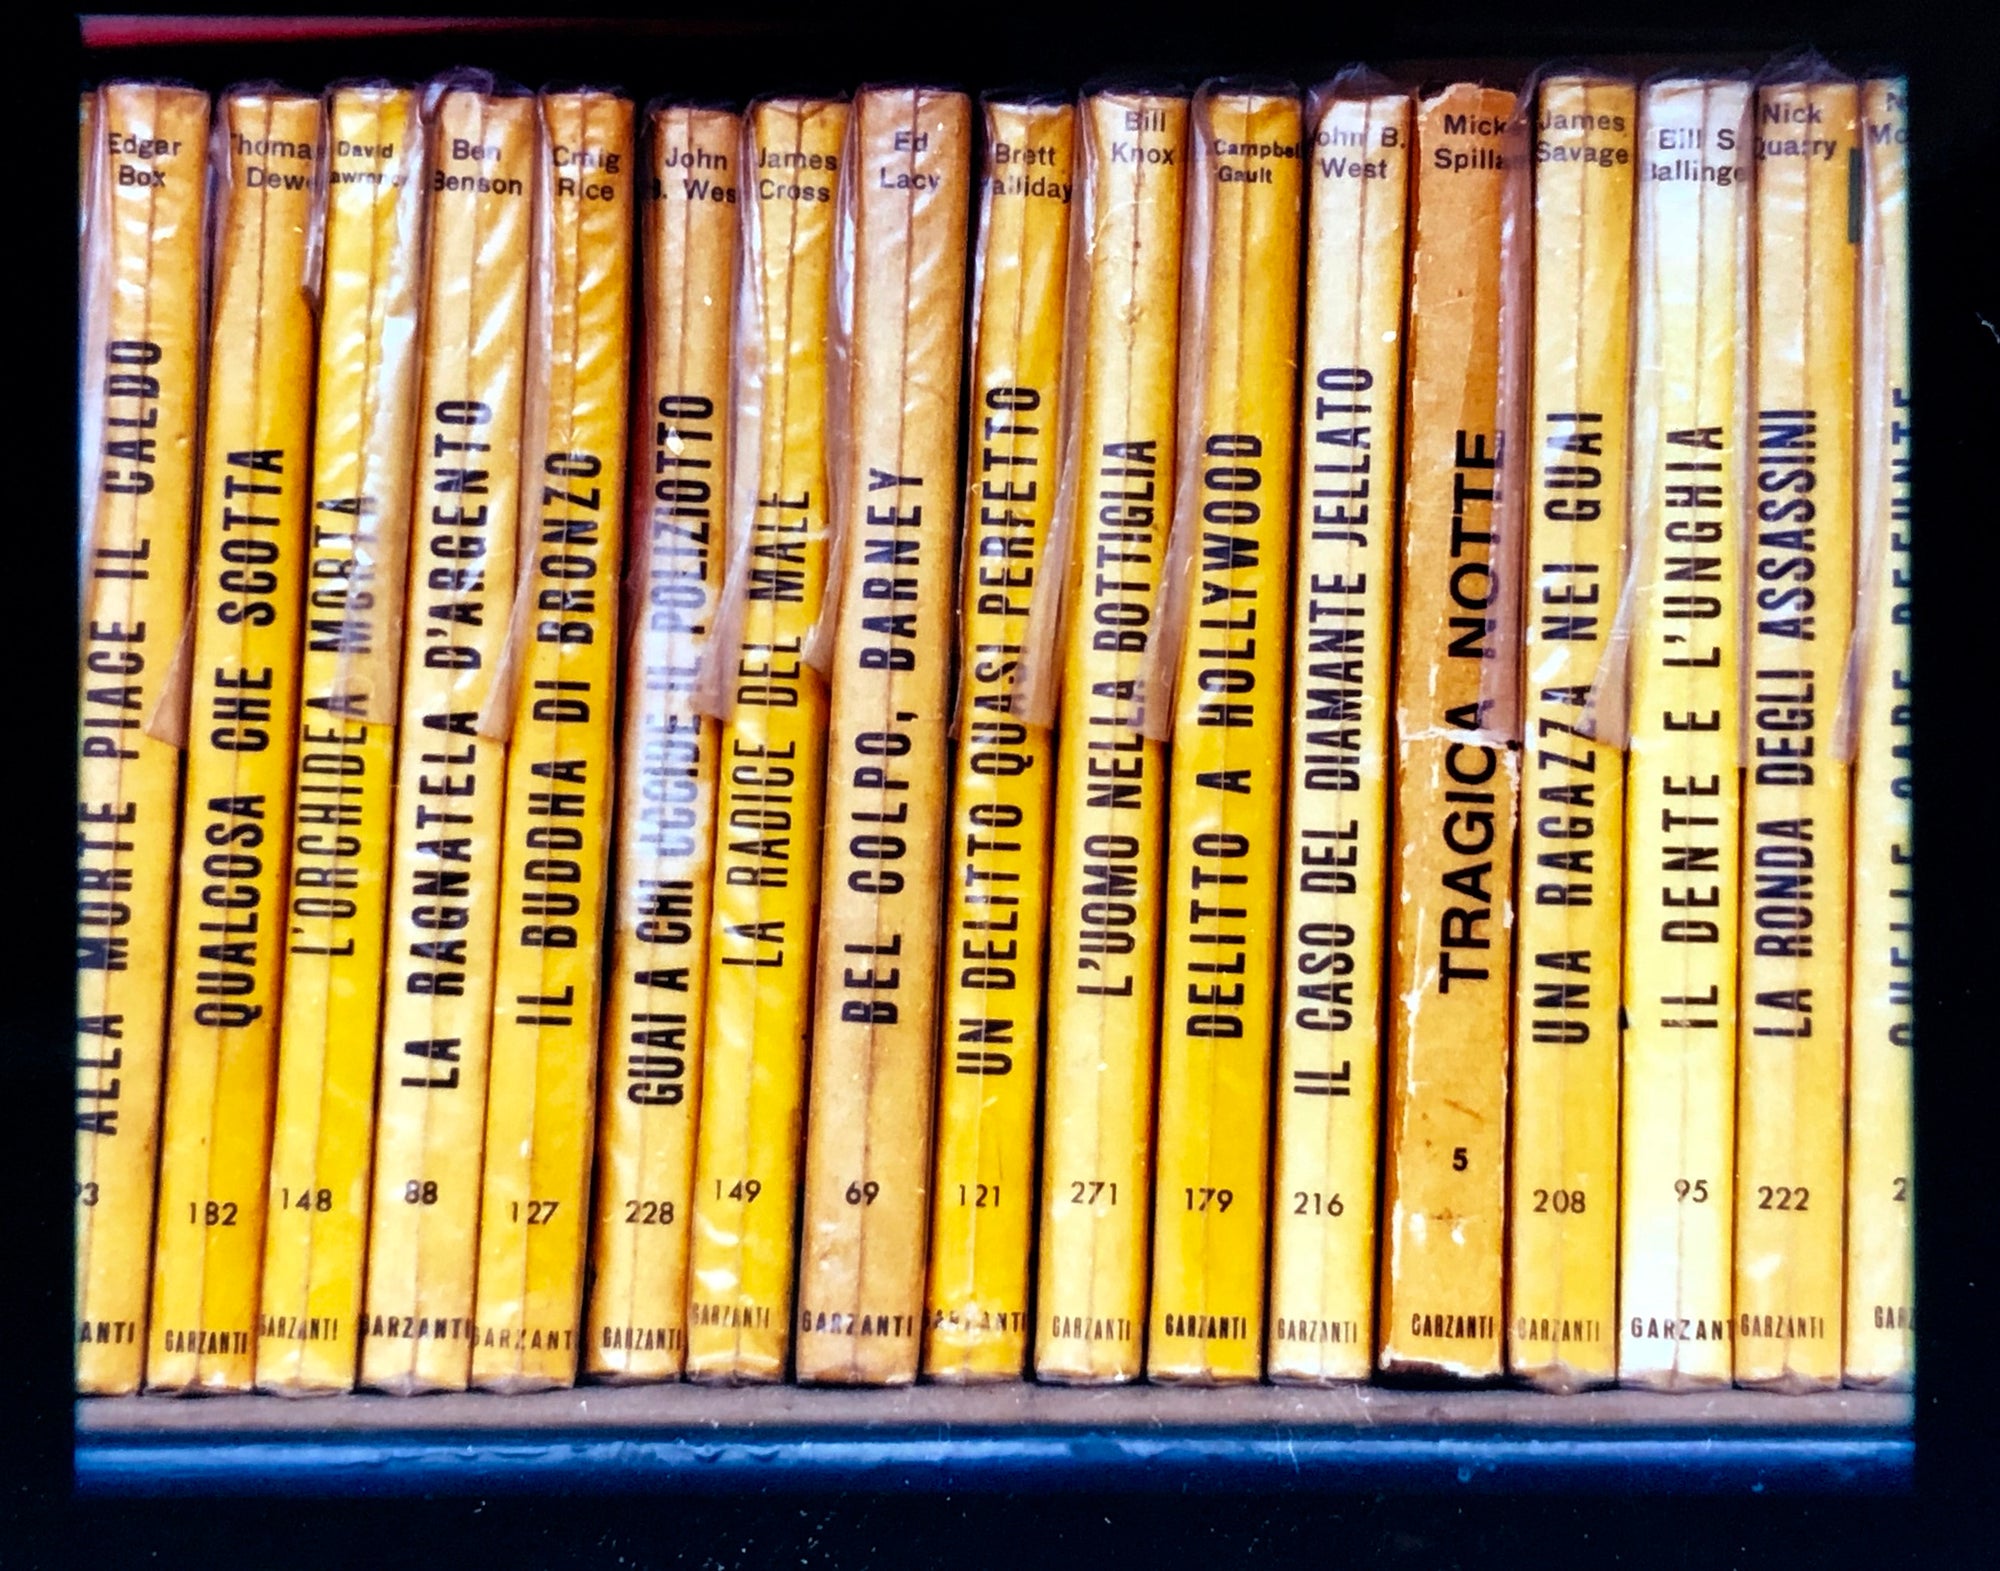 As part of Richard Heeps' series, A Short History of Milan, Delitto A Hollywood features a series of yellow Italian books from a street kiosk.